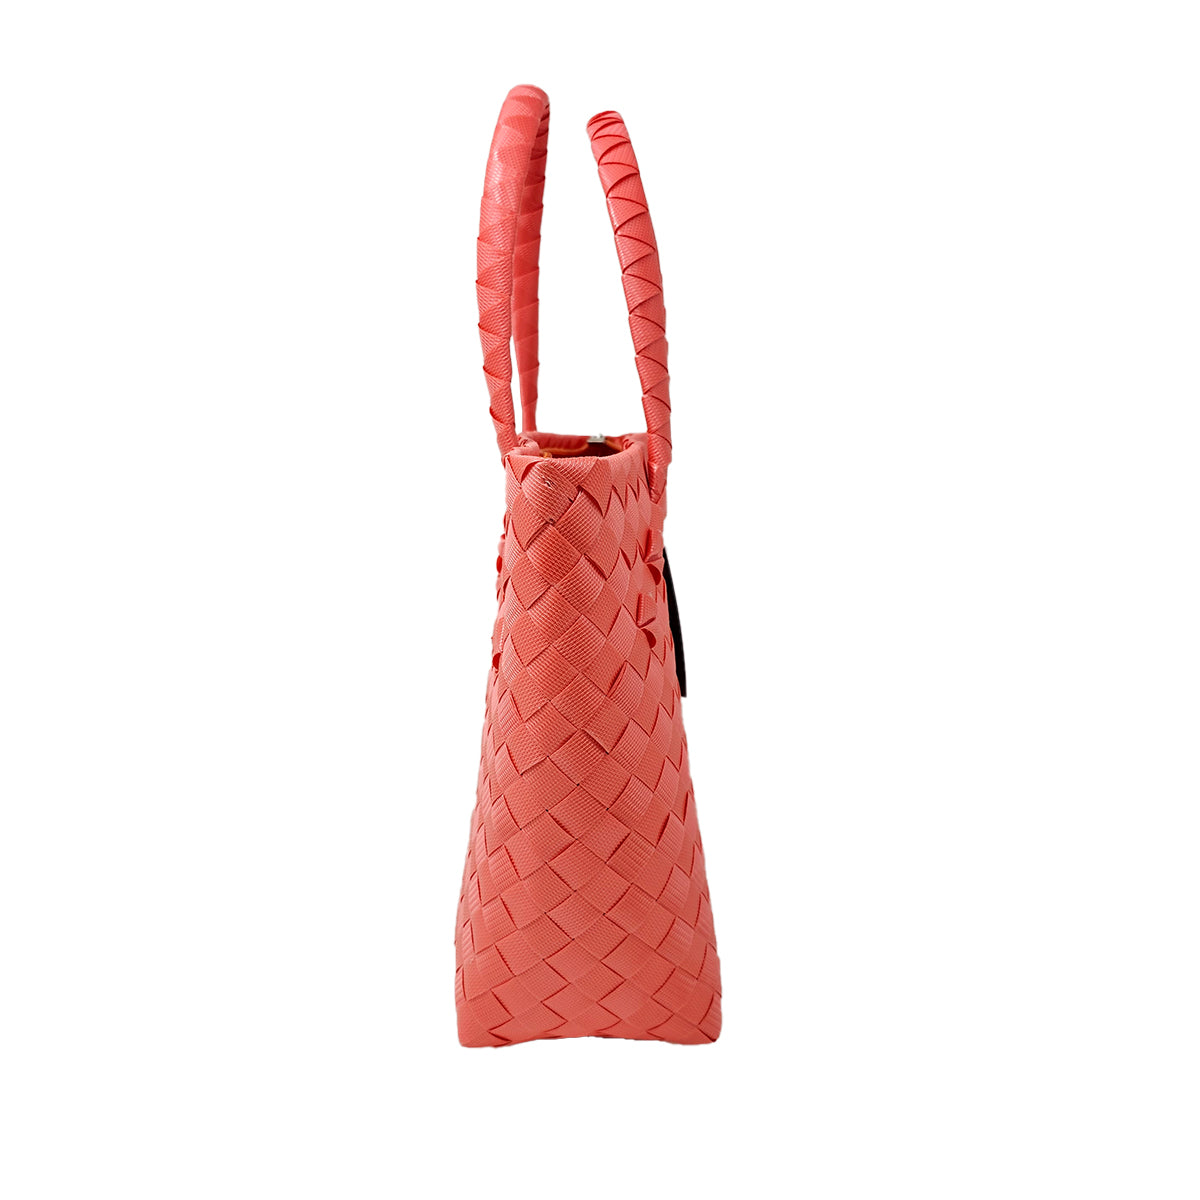 Misenka Handicrafts Philippine Bayong Coral Red Handy with Zipper Bag - SALE 50% OFF